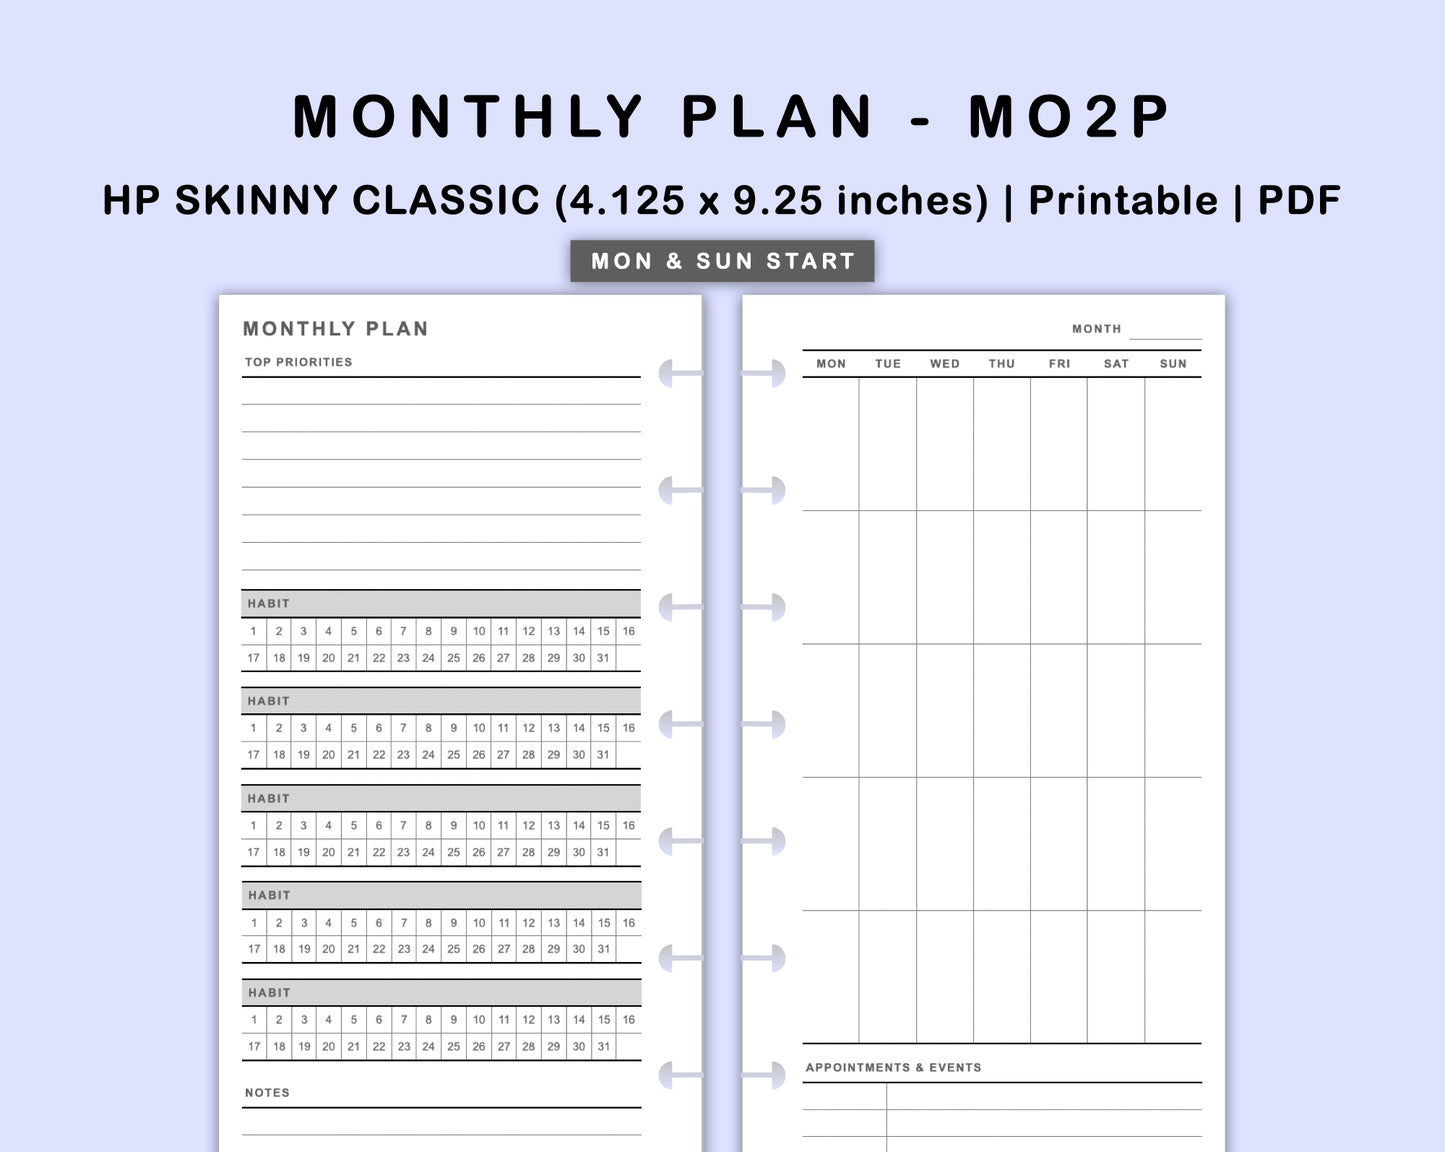 Skinny Classic HP Inserts - Monthly Plan - MO2P - with Habit Tracker